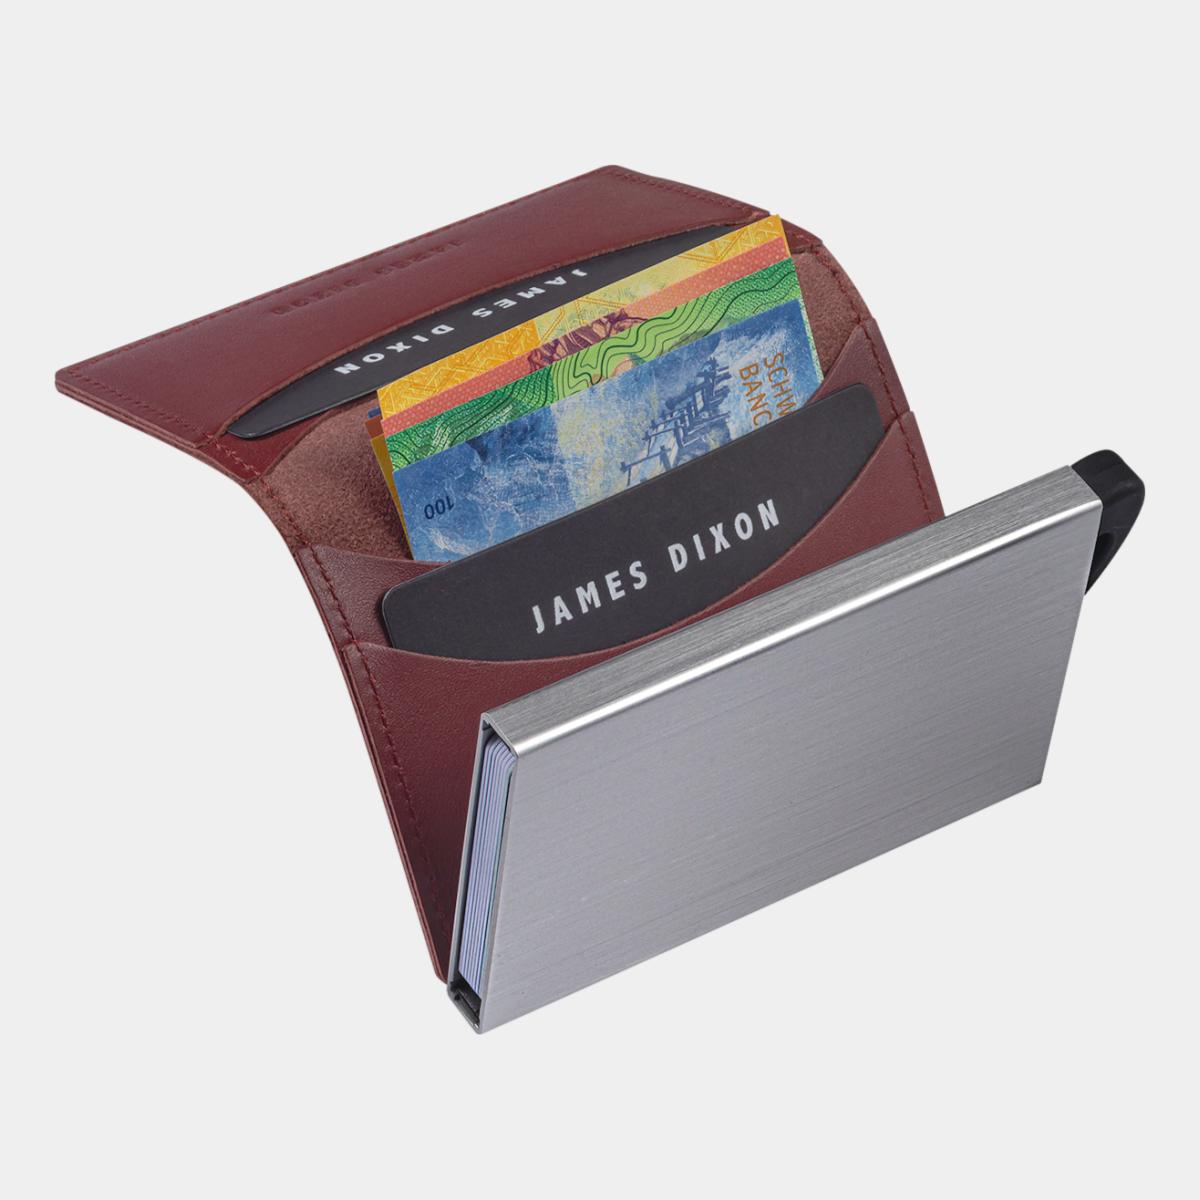 jd0018 james dixon puro one red wallet notes